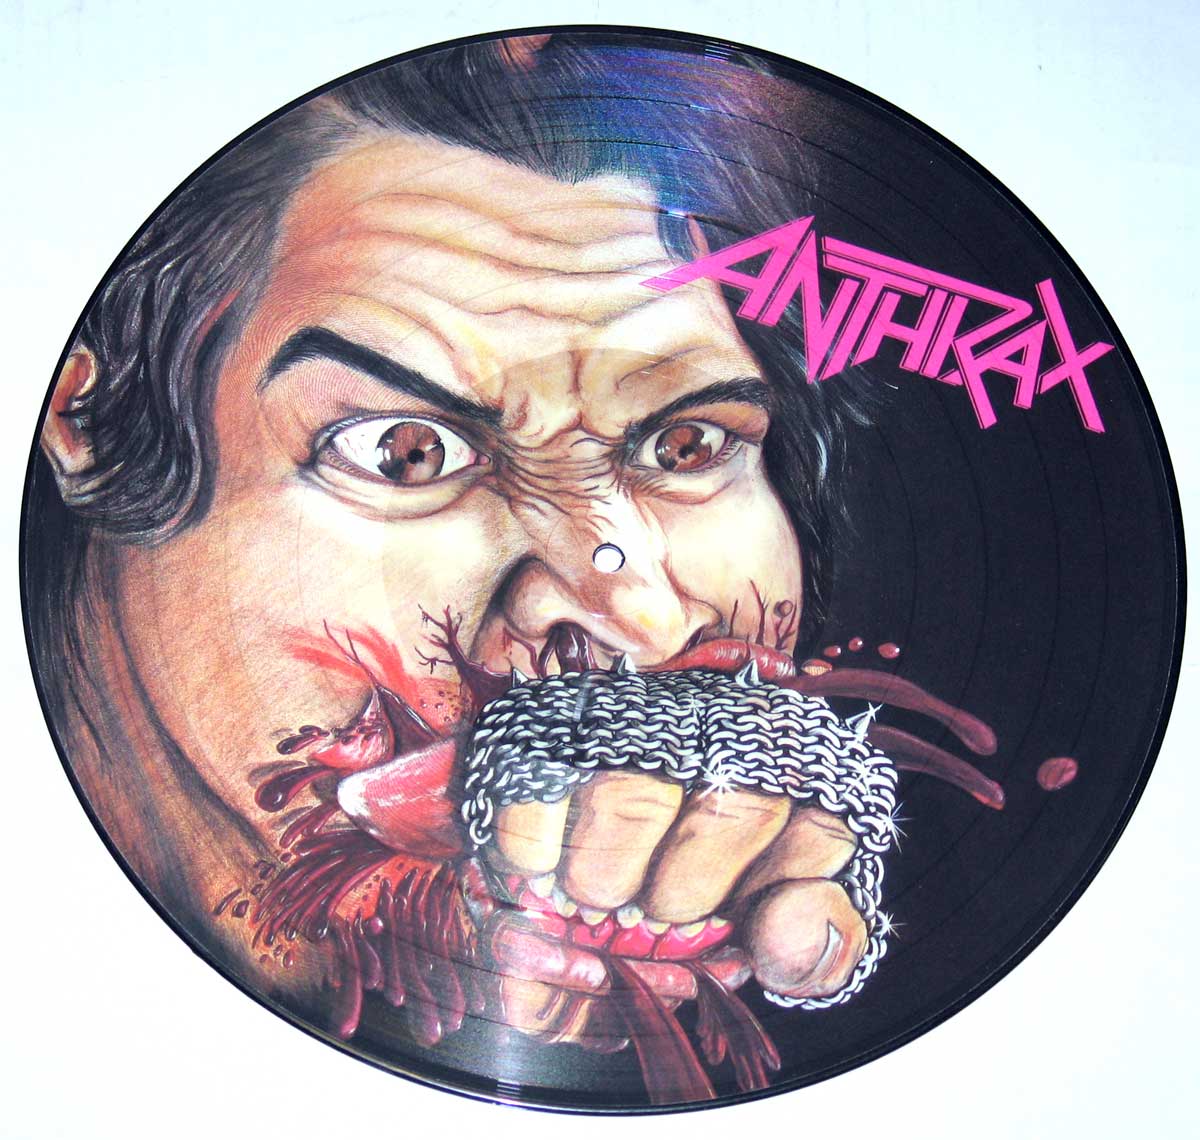 Large photo of picture disc fistful of Metal